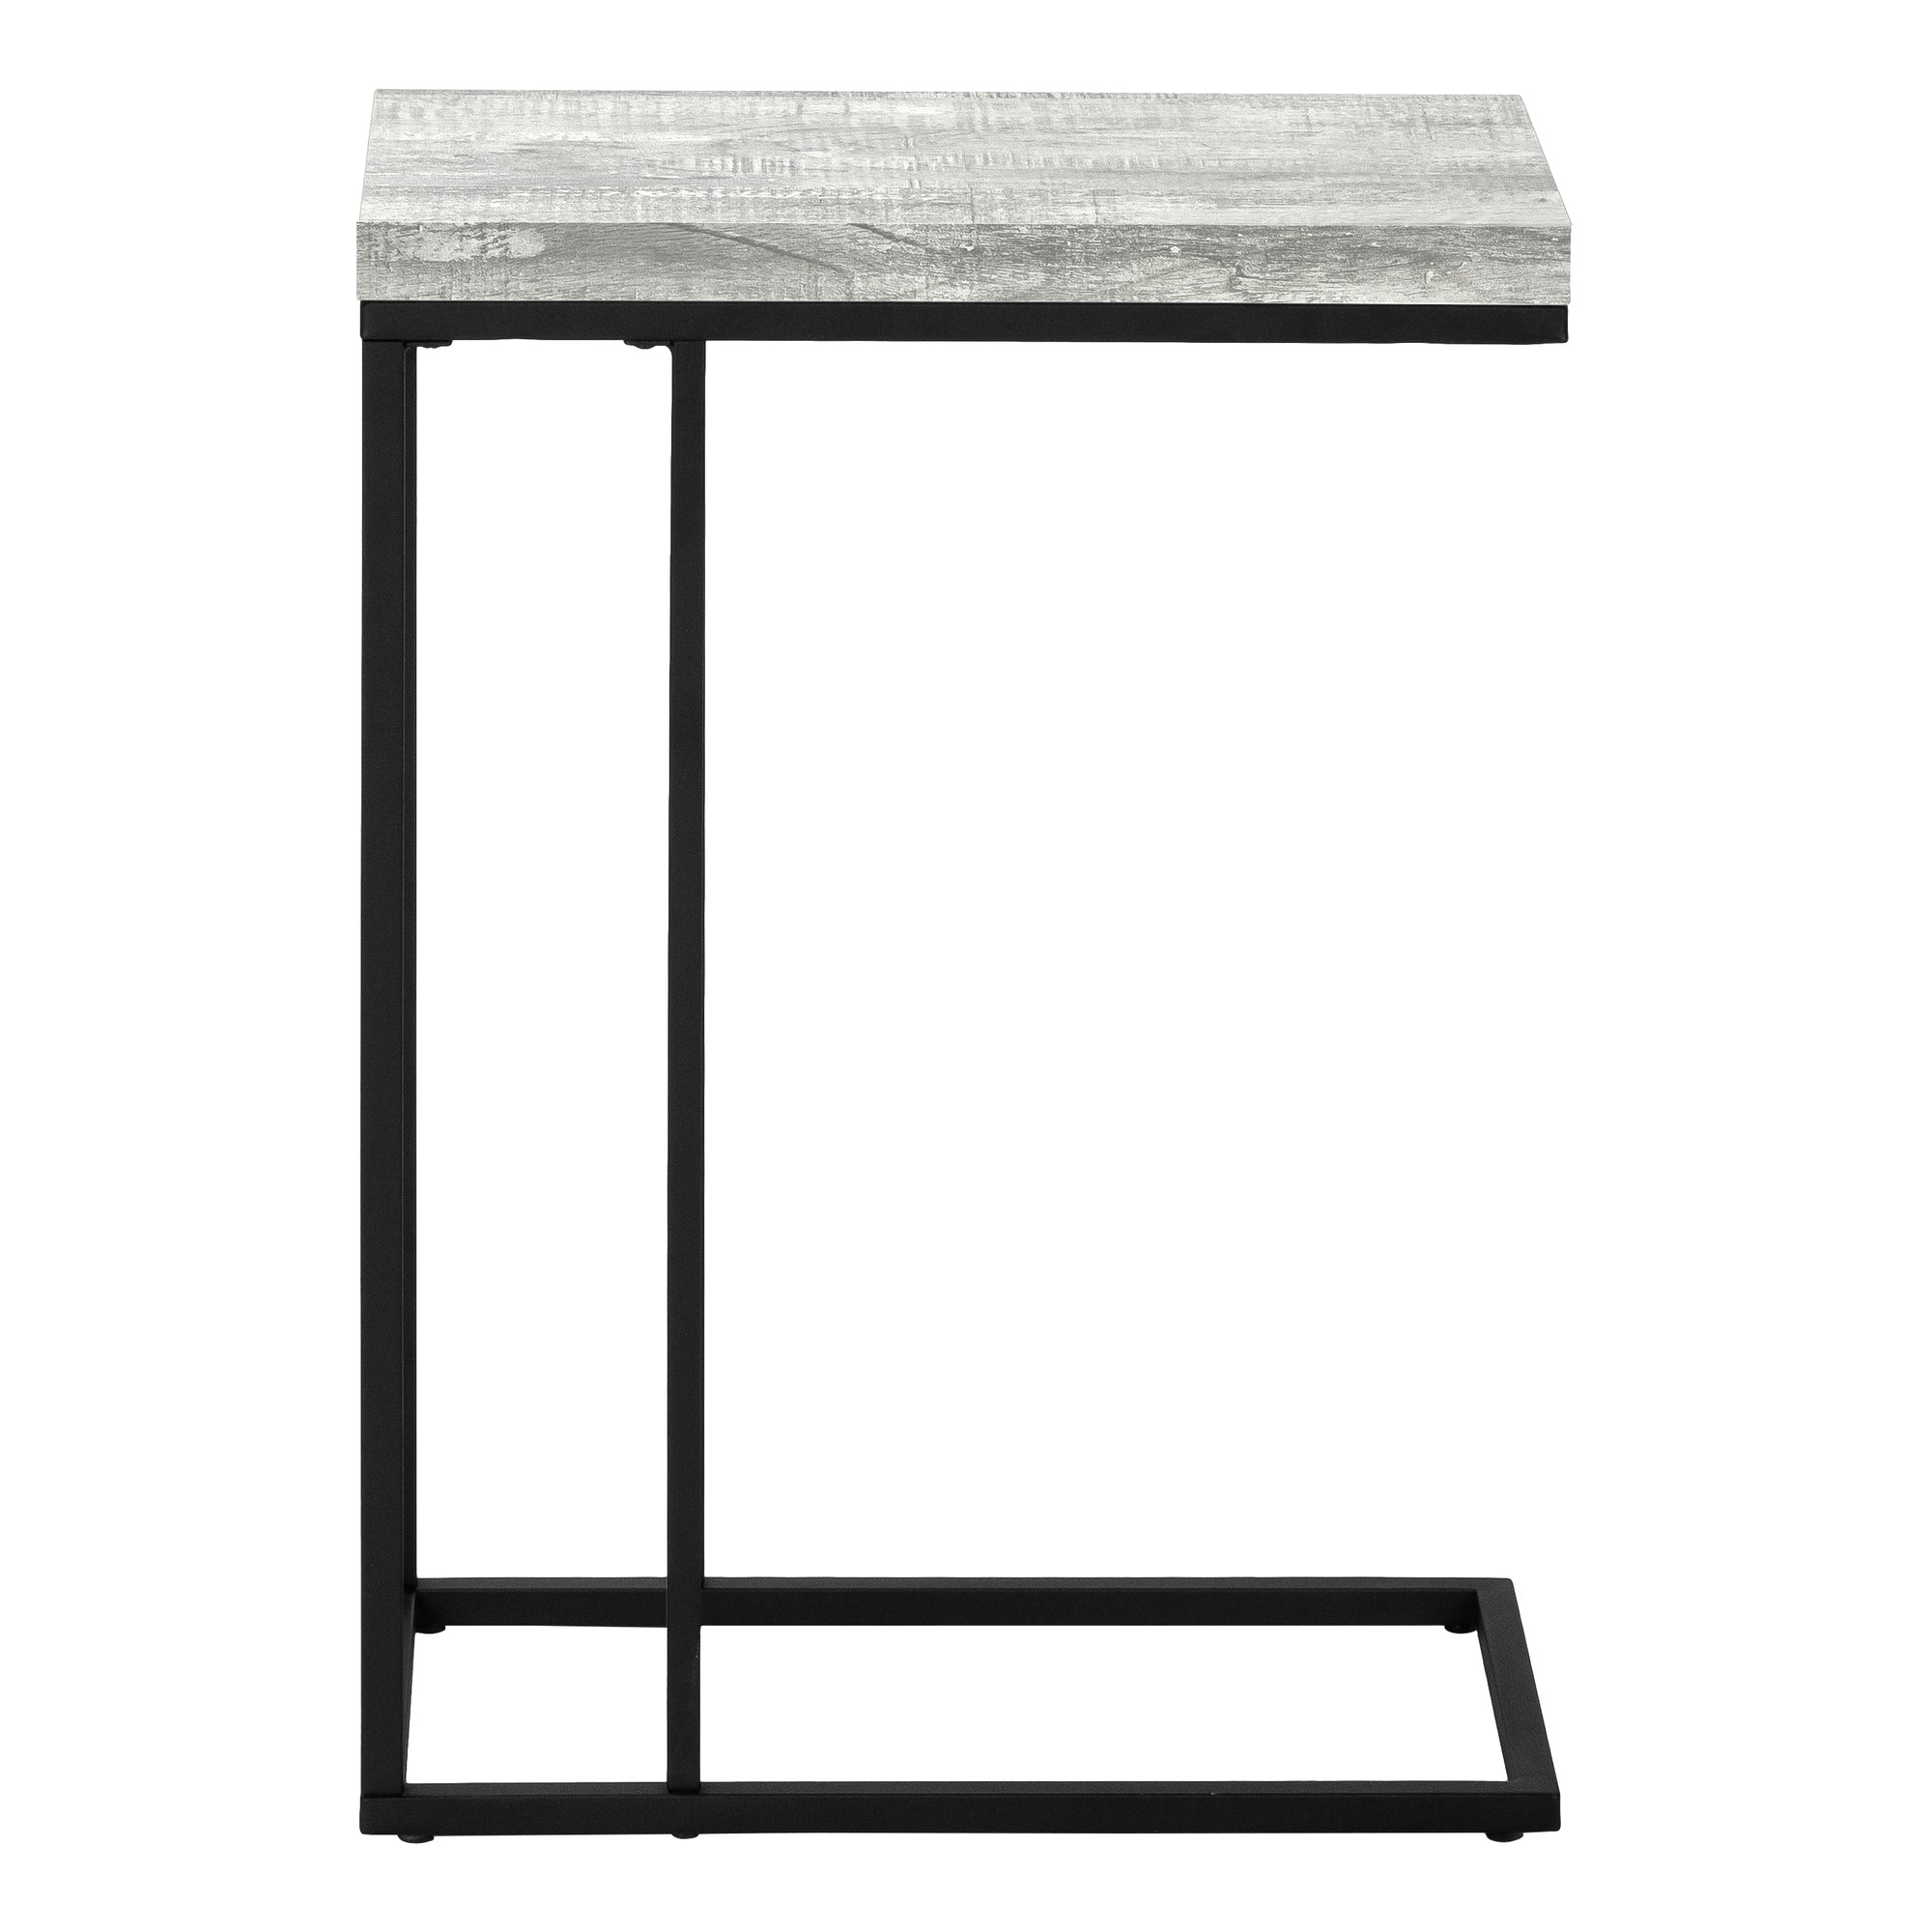 MN-473404    Accent Table, C-Shaped, End, Side, Snack, Living Room, Bedroom, Metal Legs, Laminate, Grey Reclaimed Wood Look, Black, Contemporary, Modern